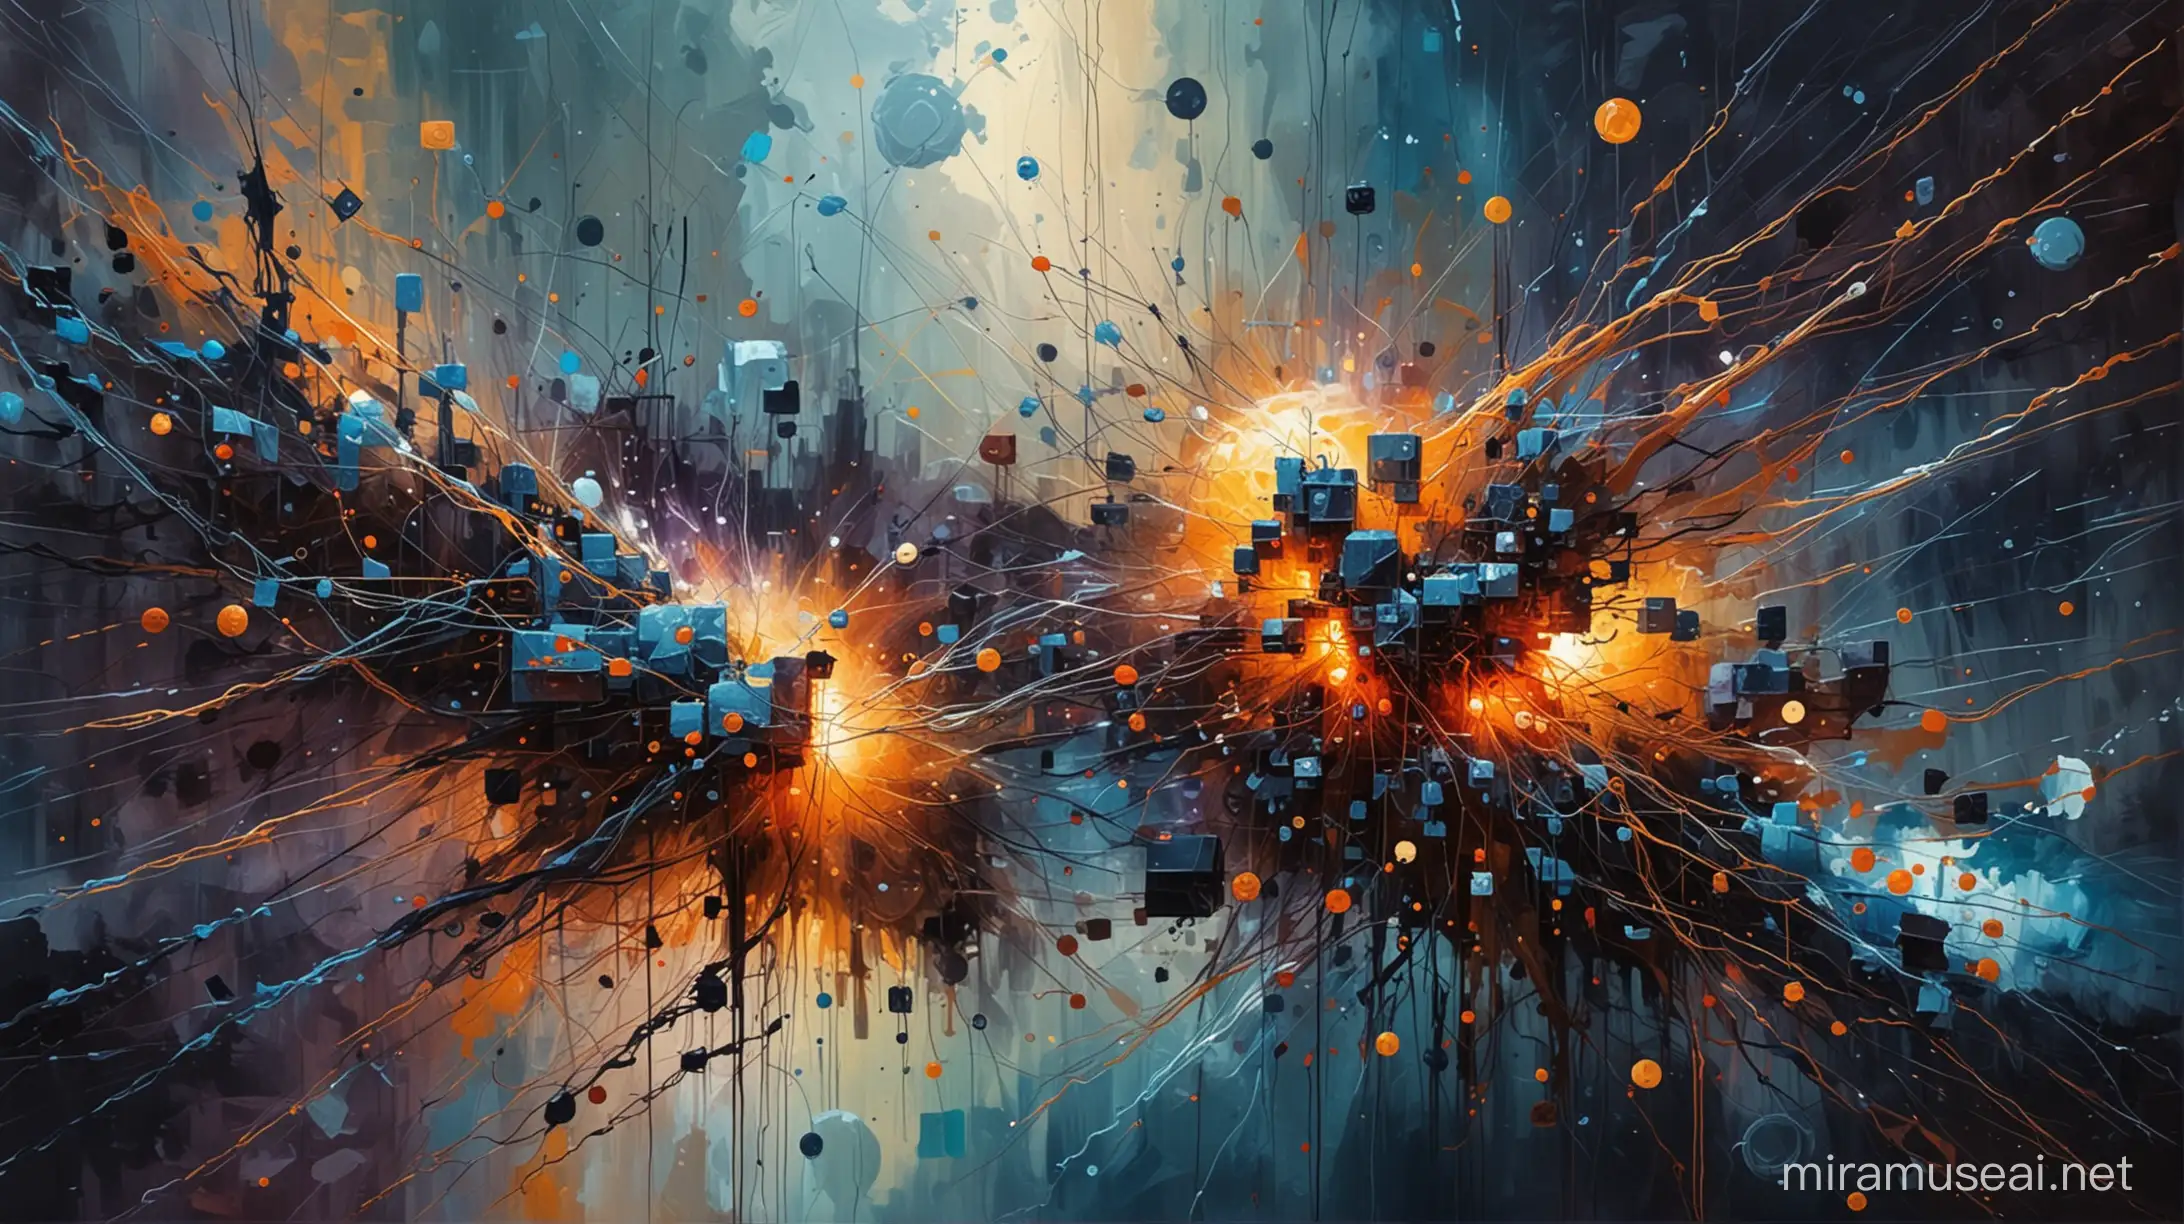 Abstract Modern Techy Artistry in Oil Painting Style